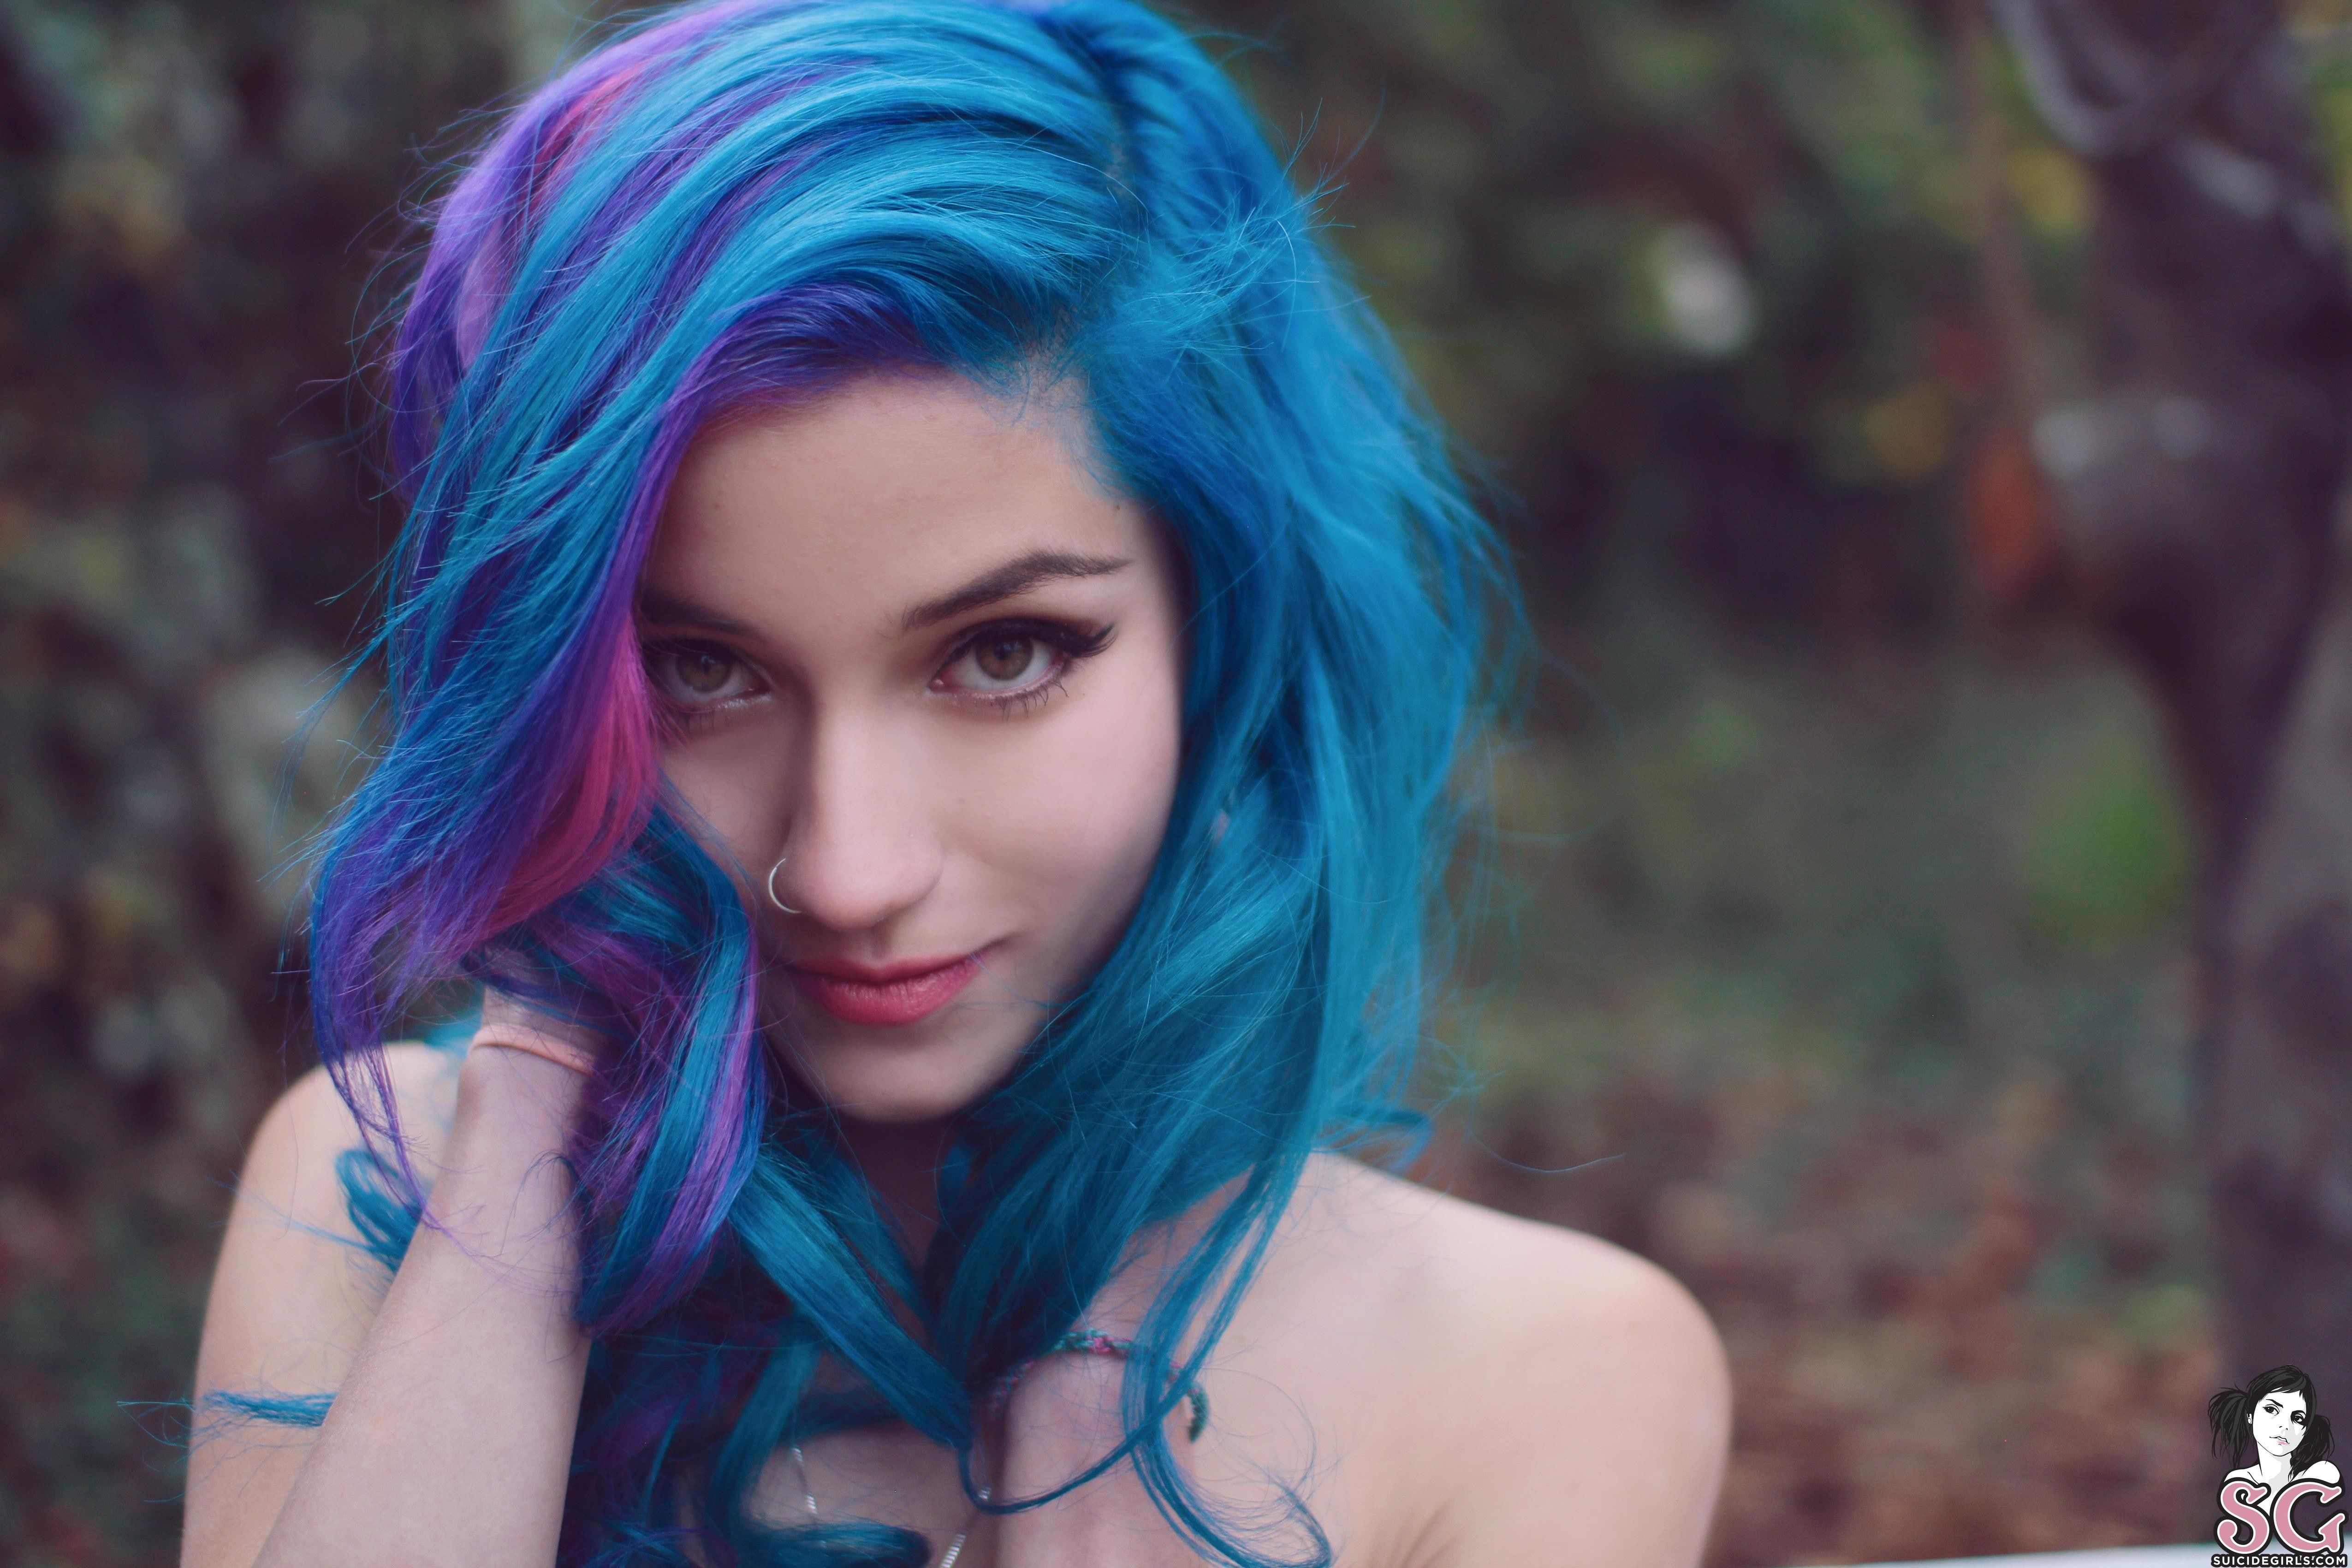 1. "Purple and Blue Hair Girl" 
2. "Vibrant Hair Colors for Girls" 
3. "Trendy Hair Dye Ideas for Girls" 
4. "Bold Hair Color Combinations for Girls" 
5. "Funky Hair Colors for Girls" 
6. "Edgy Hairstyles for Girls with Purple and Blue Hair" 
7. "Celebrities with Purple and Blue Hair" 
8. "Mermaid Hair Inspiration for Girls" 
9. "Pastel Hair Colors for Girls" 
10. "Unicorn Hair Trends for Girls" - wide 5